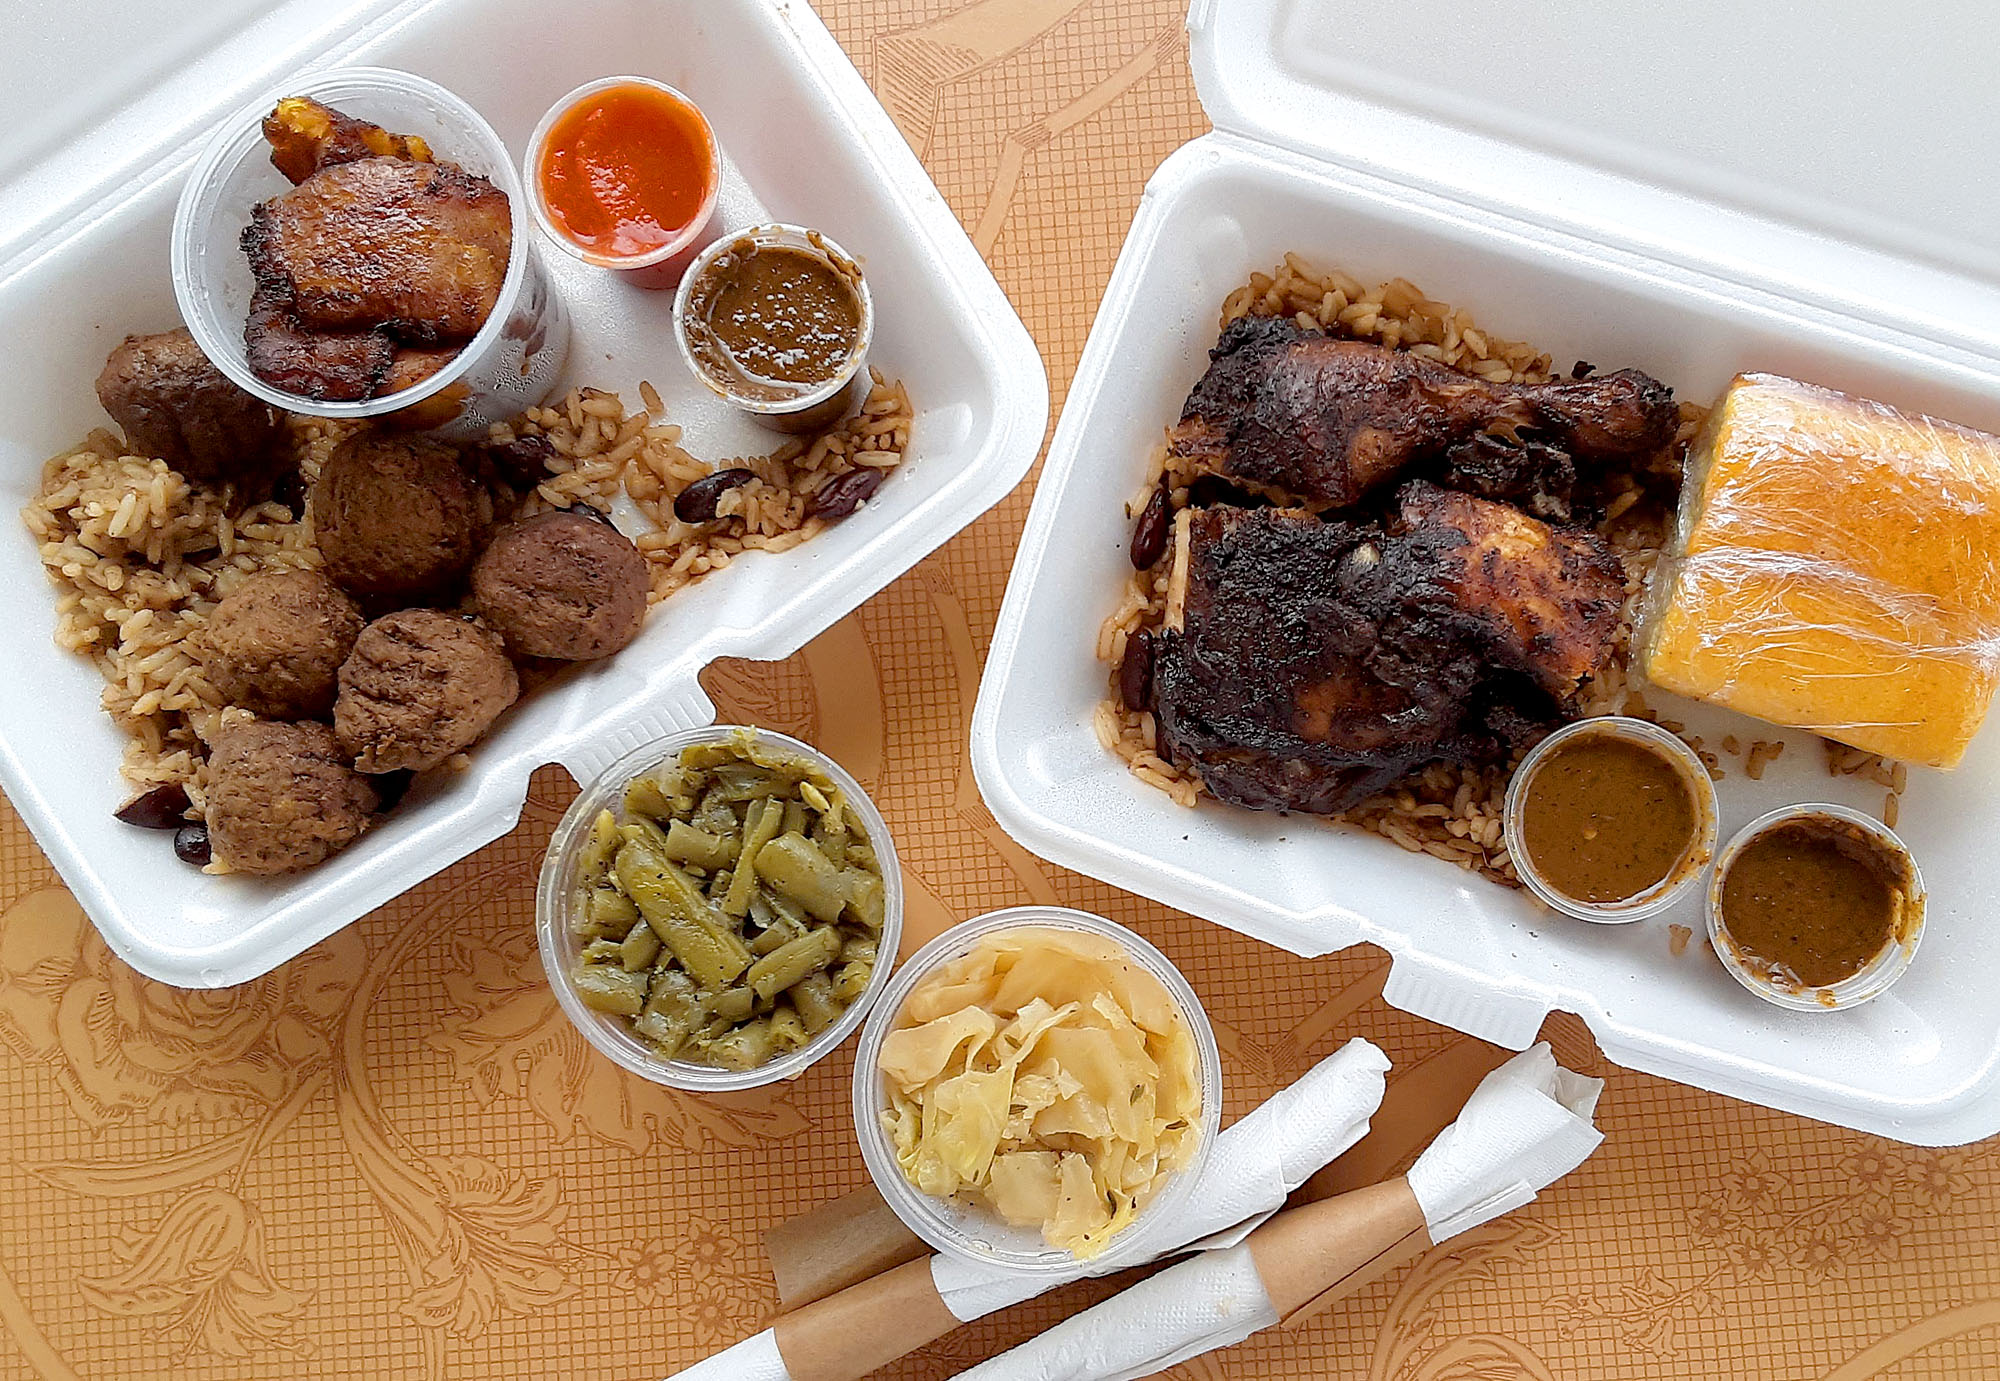 On a brown table, there are two takeout containers and two cups of sides. Photo by Paul Young.